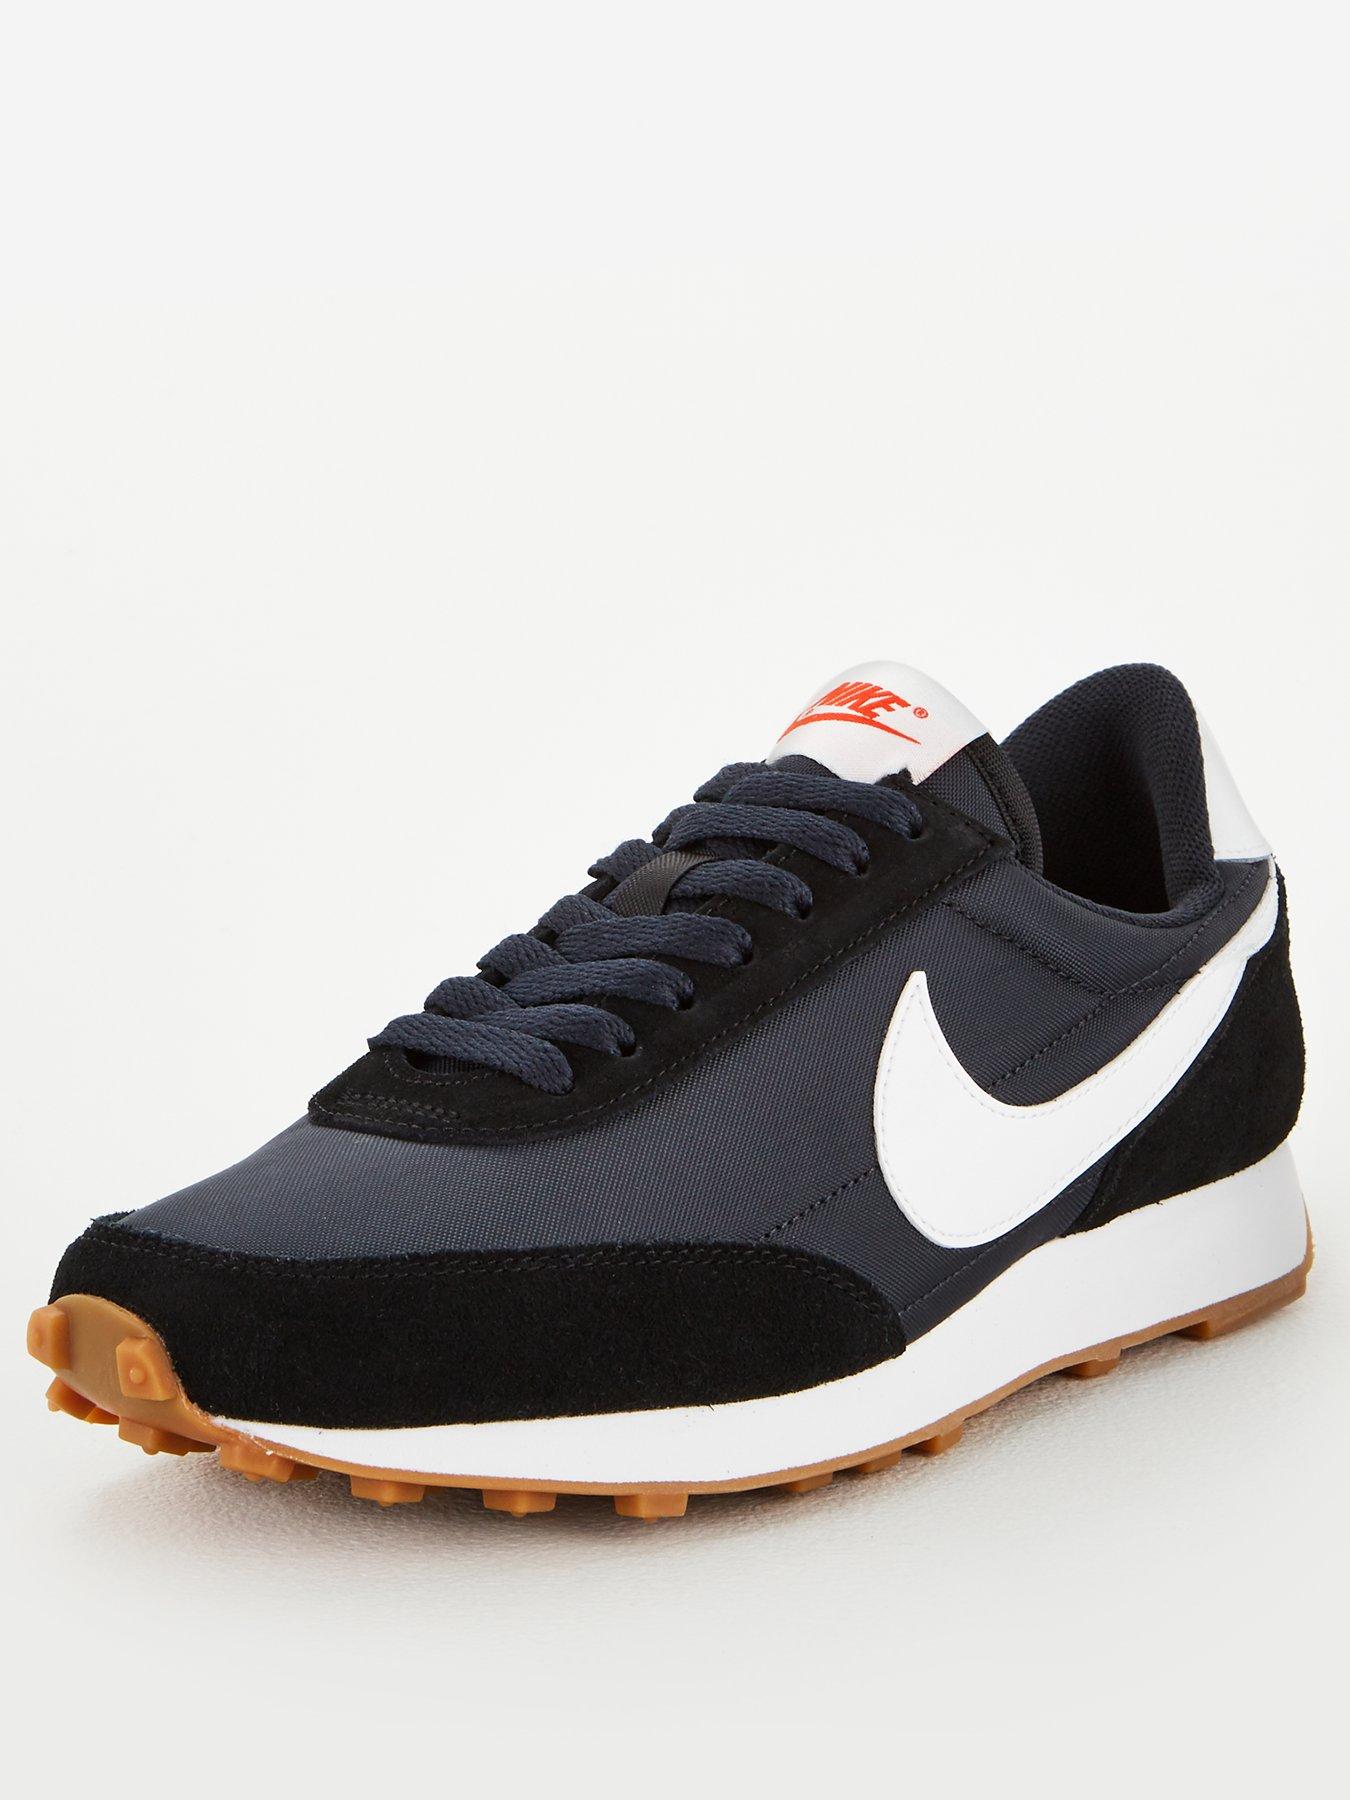 nike daybreak trainers in black and white